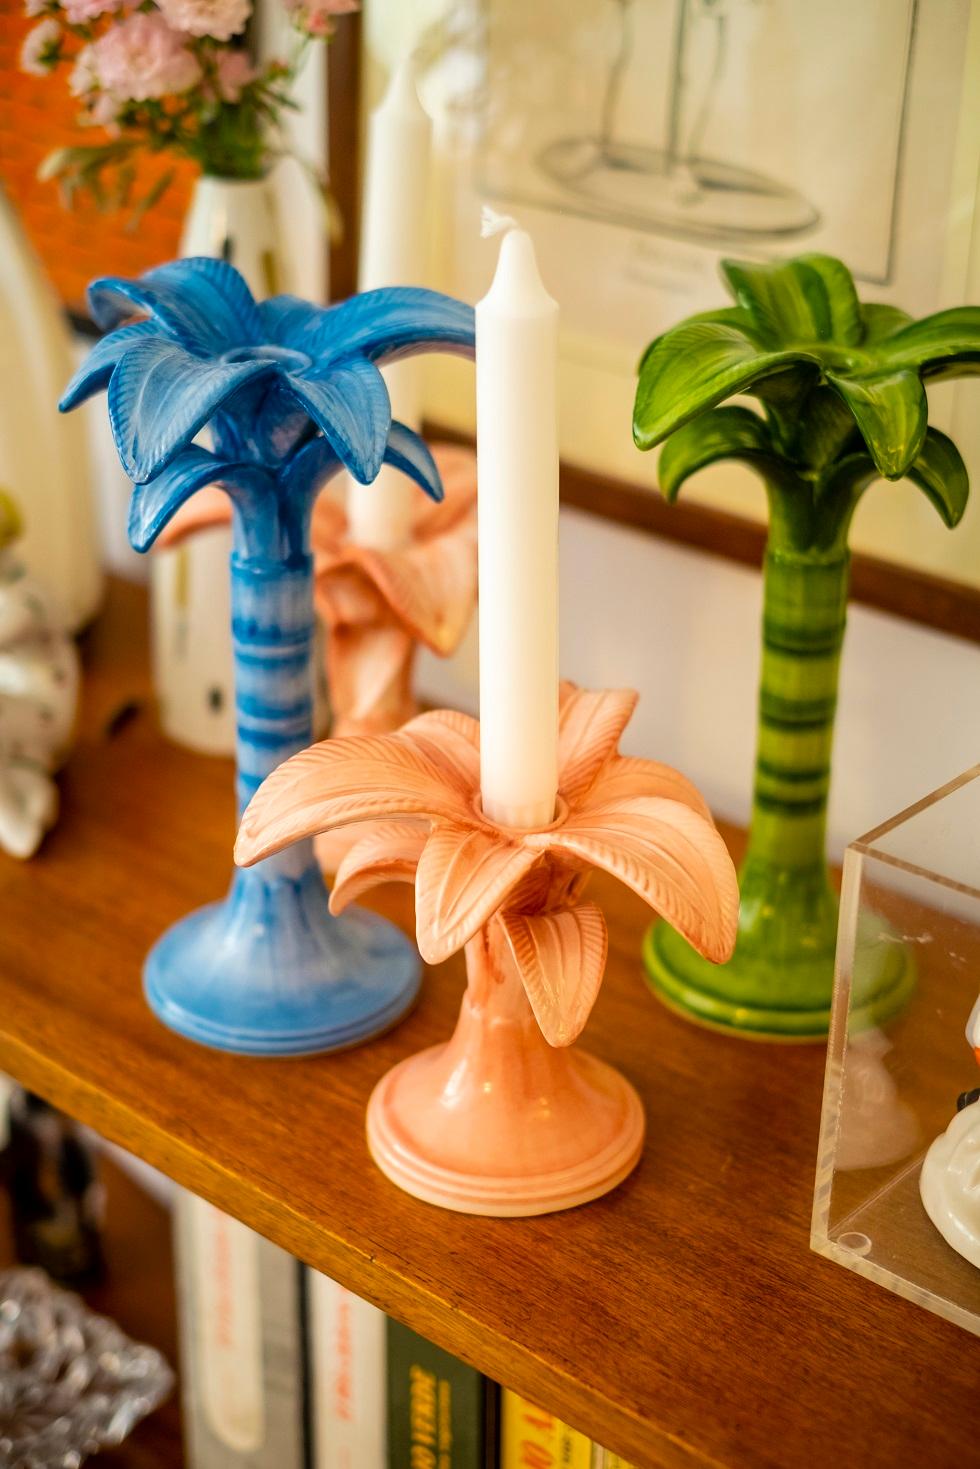 Light up your table with our palm trees candlestick
Size small 15cm
Size medium 25cm.